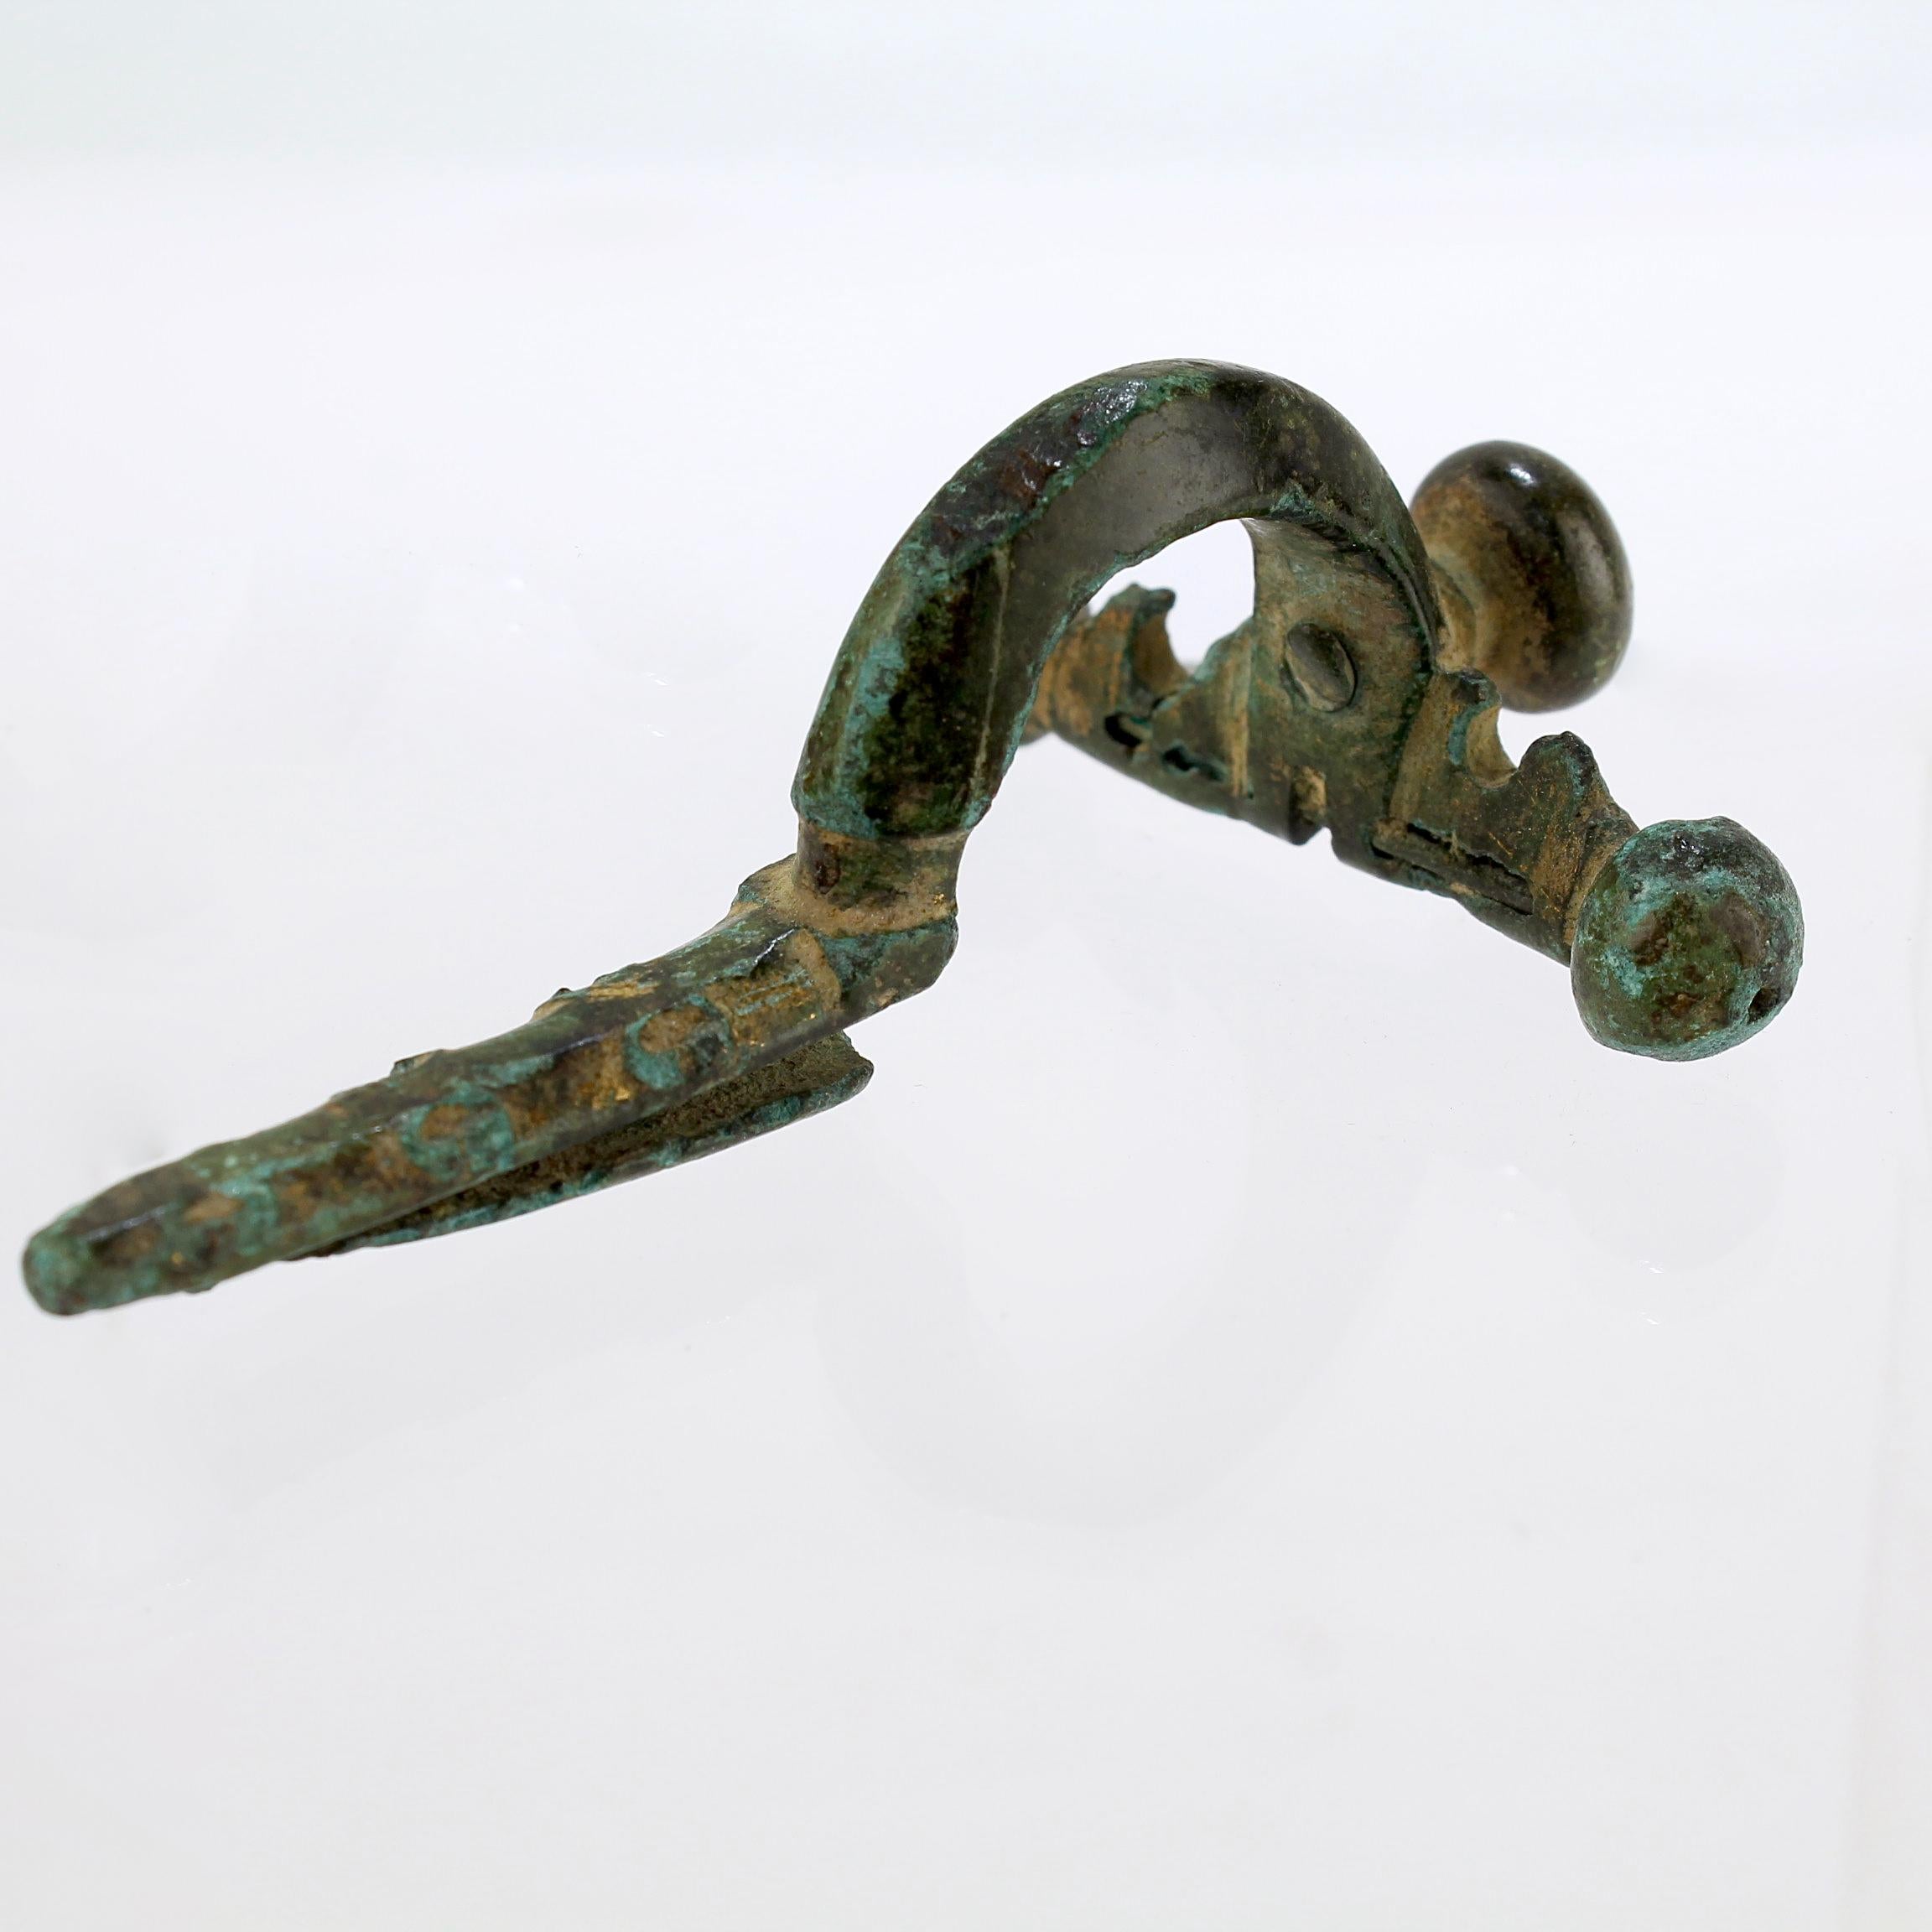 A fine ancient Roman bronze fibula.

A so-called crossbow fibula.

From the private collection of Lawrence Majewski, who was a former conservator at the Metropolitan Museum of Art. 

Simply a wonderful piece for the wunderkammer or curio